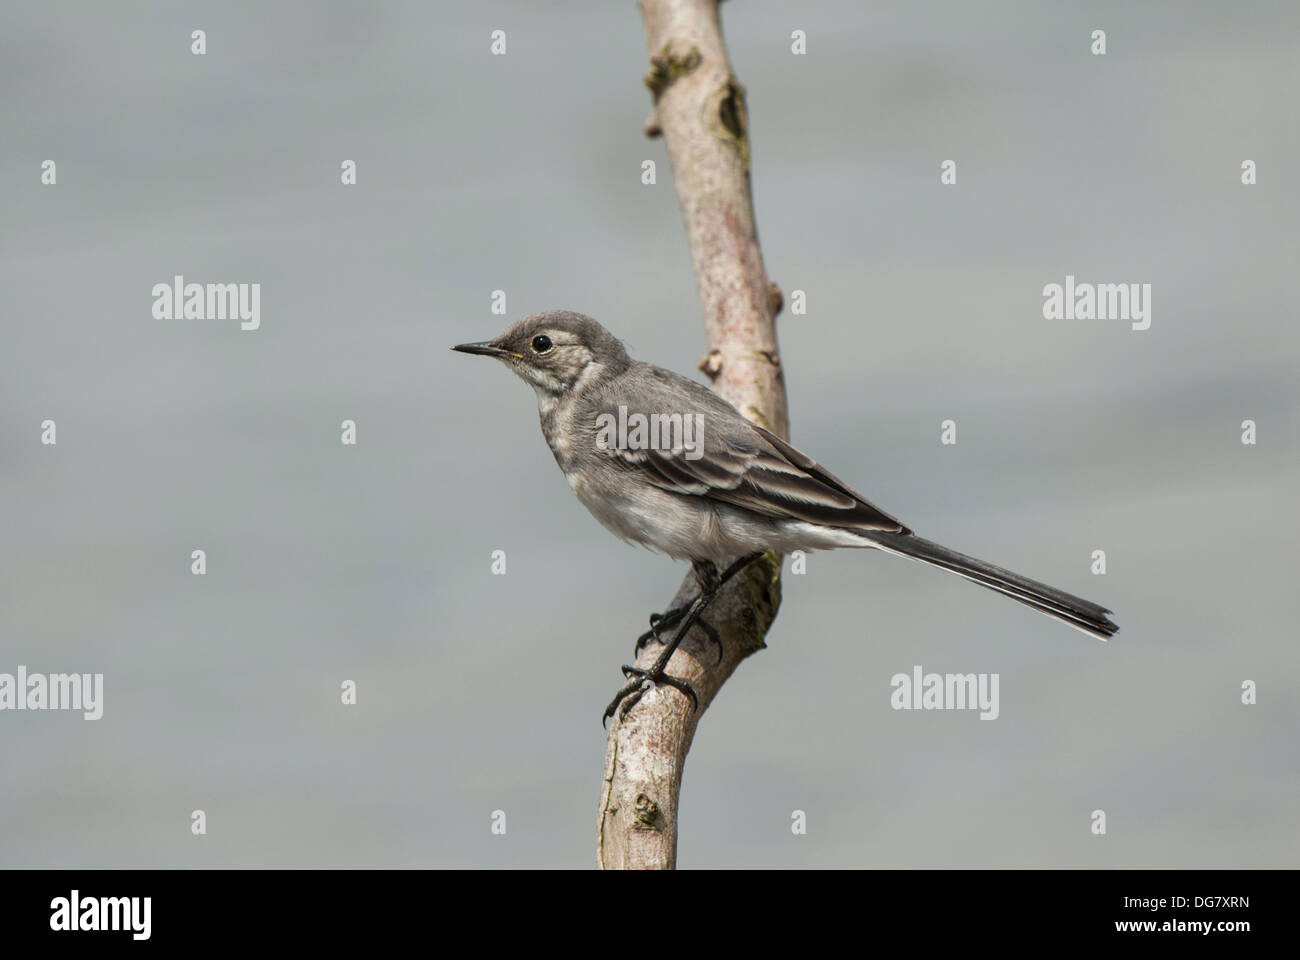 Juvenile Pied Wagtail on Branch filling frame. Stock Photo